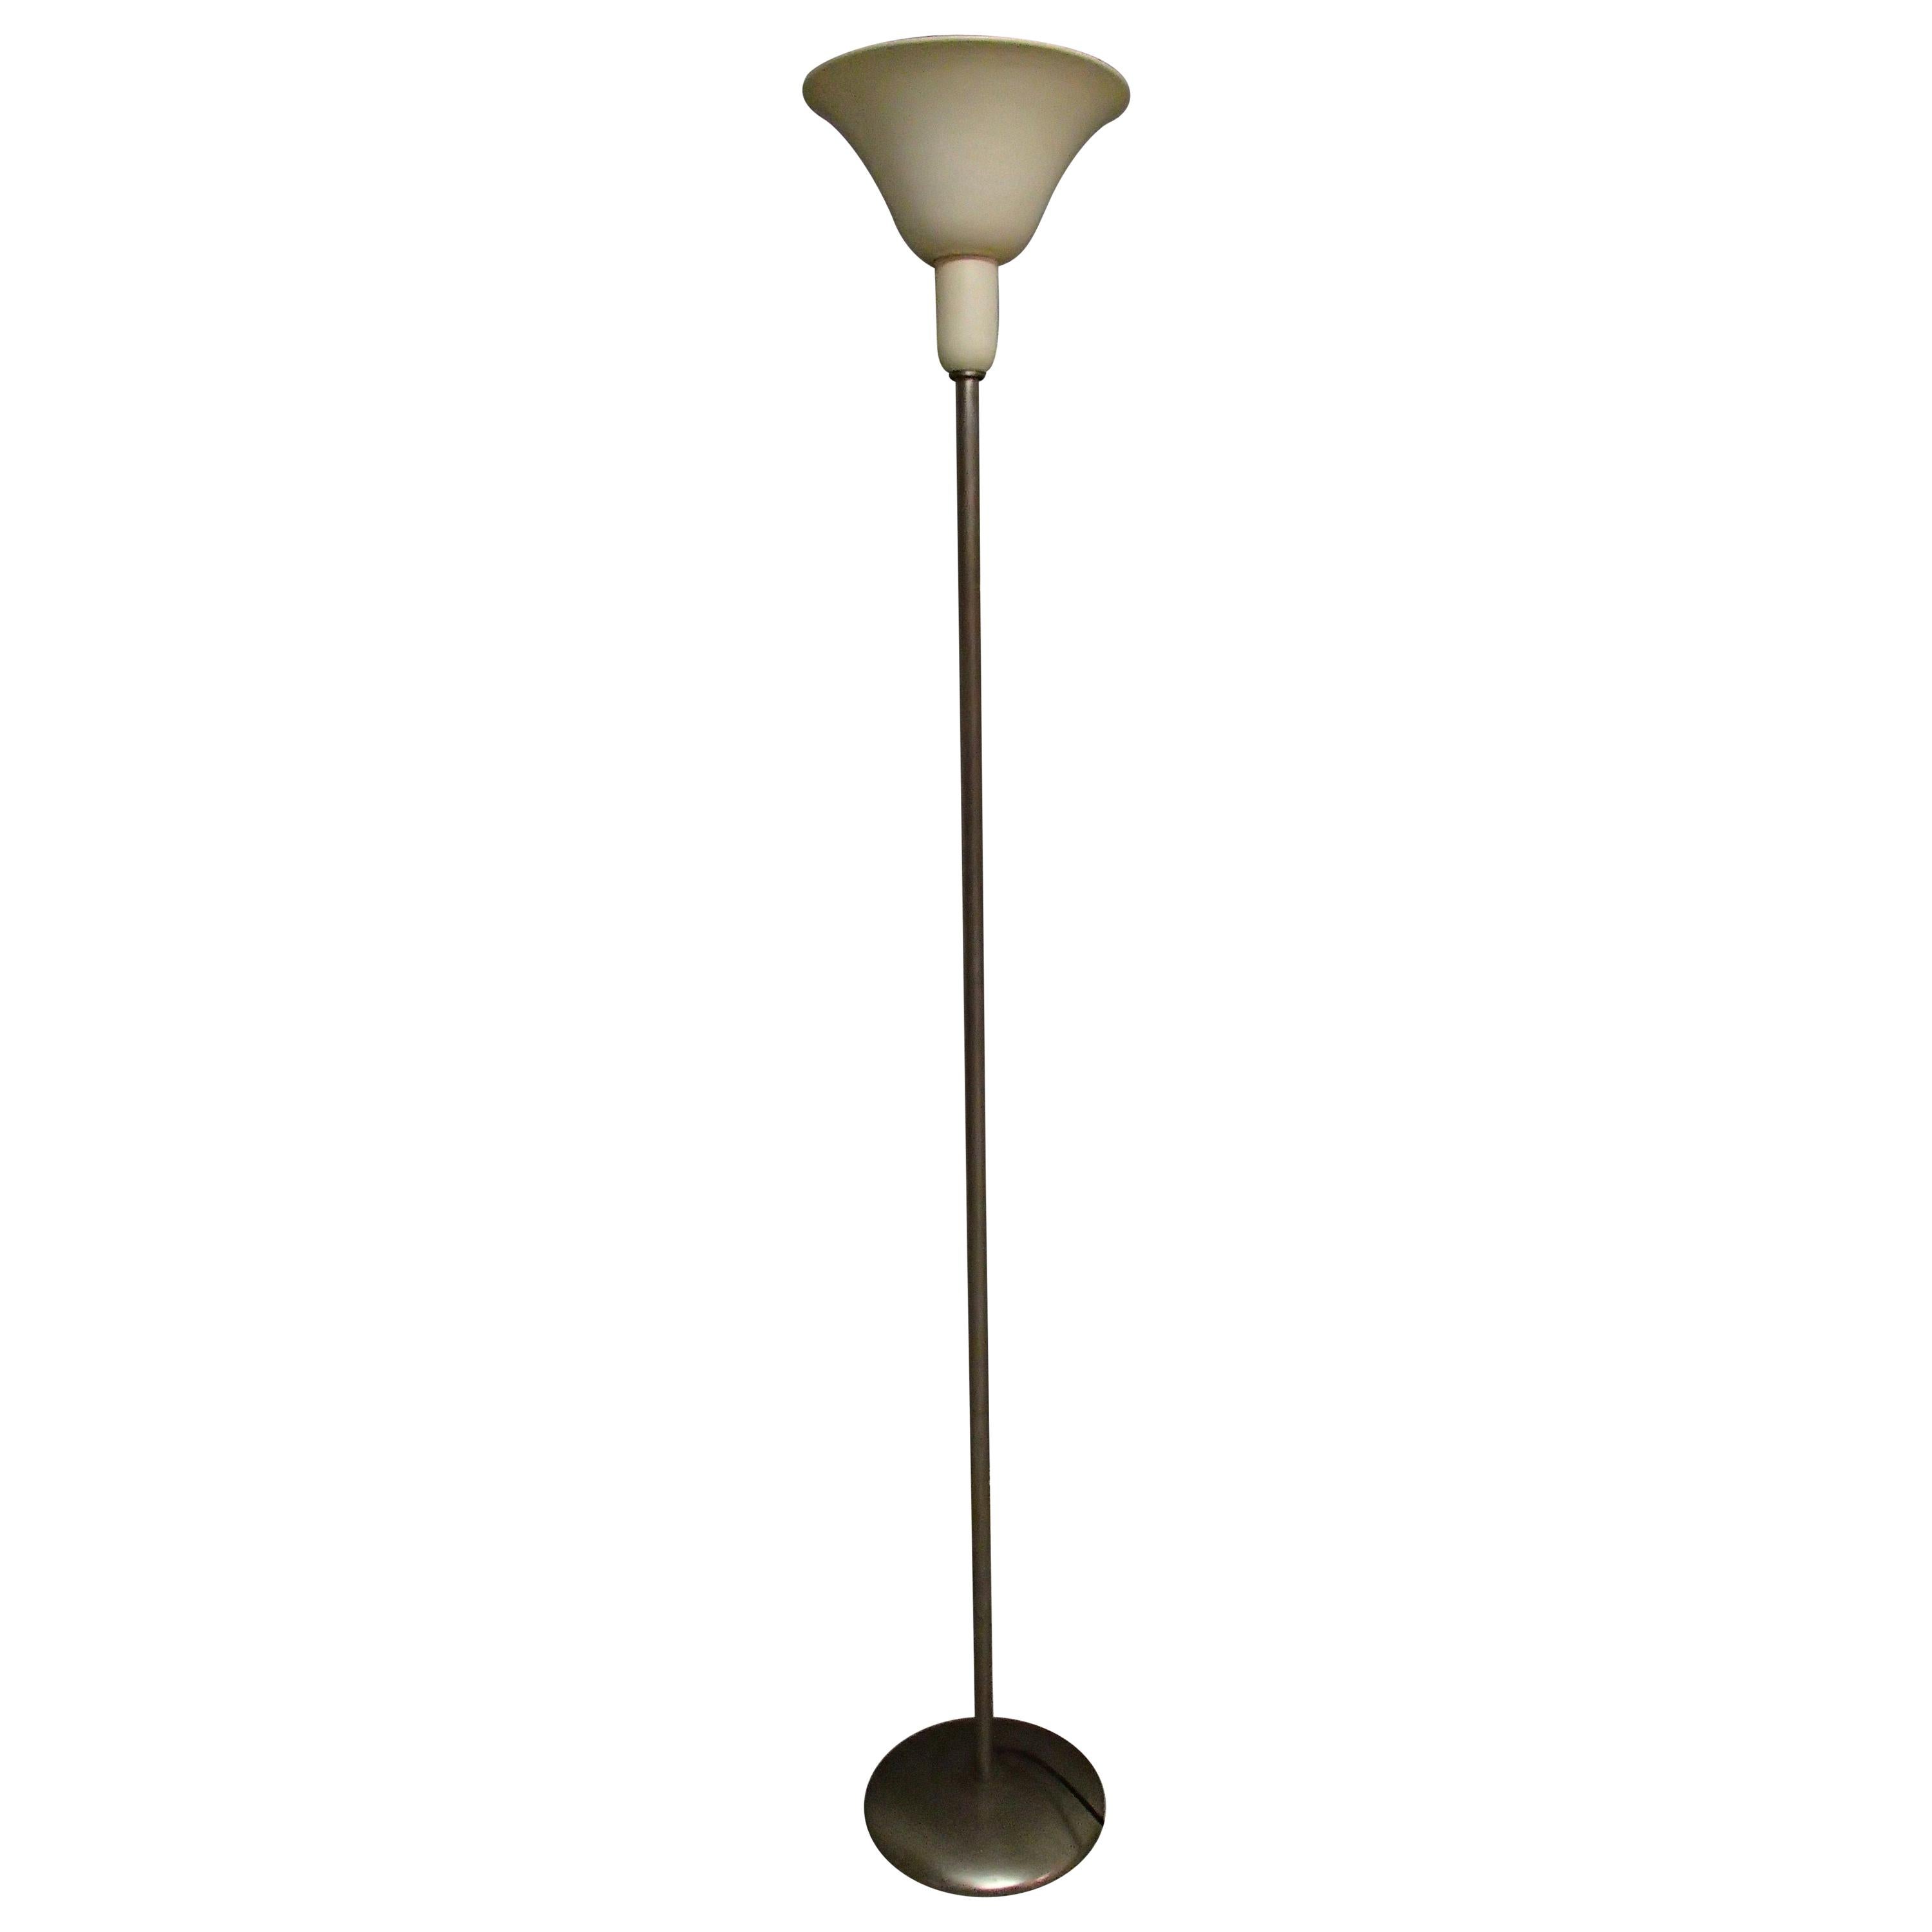 BAG Turgi Indi Floor Lamp Chrome and Withe Shade by Sigfried Giedion